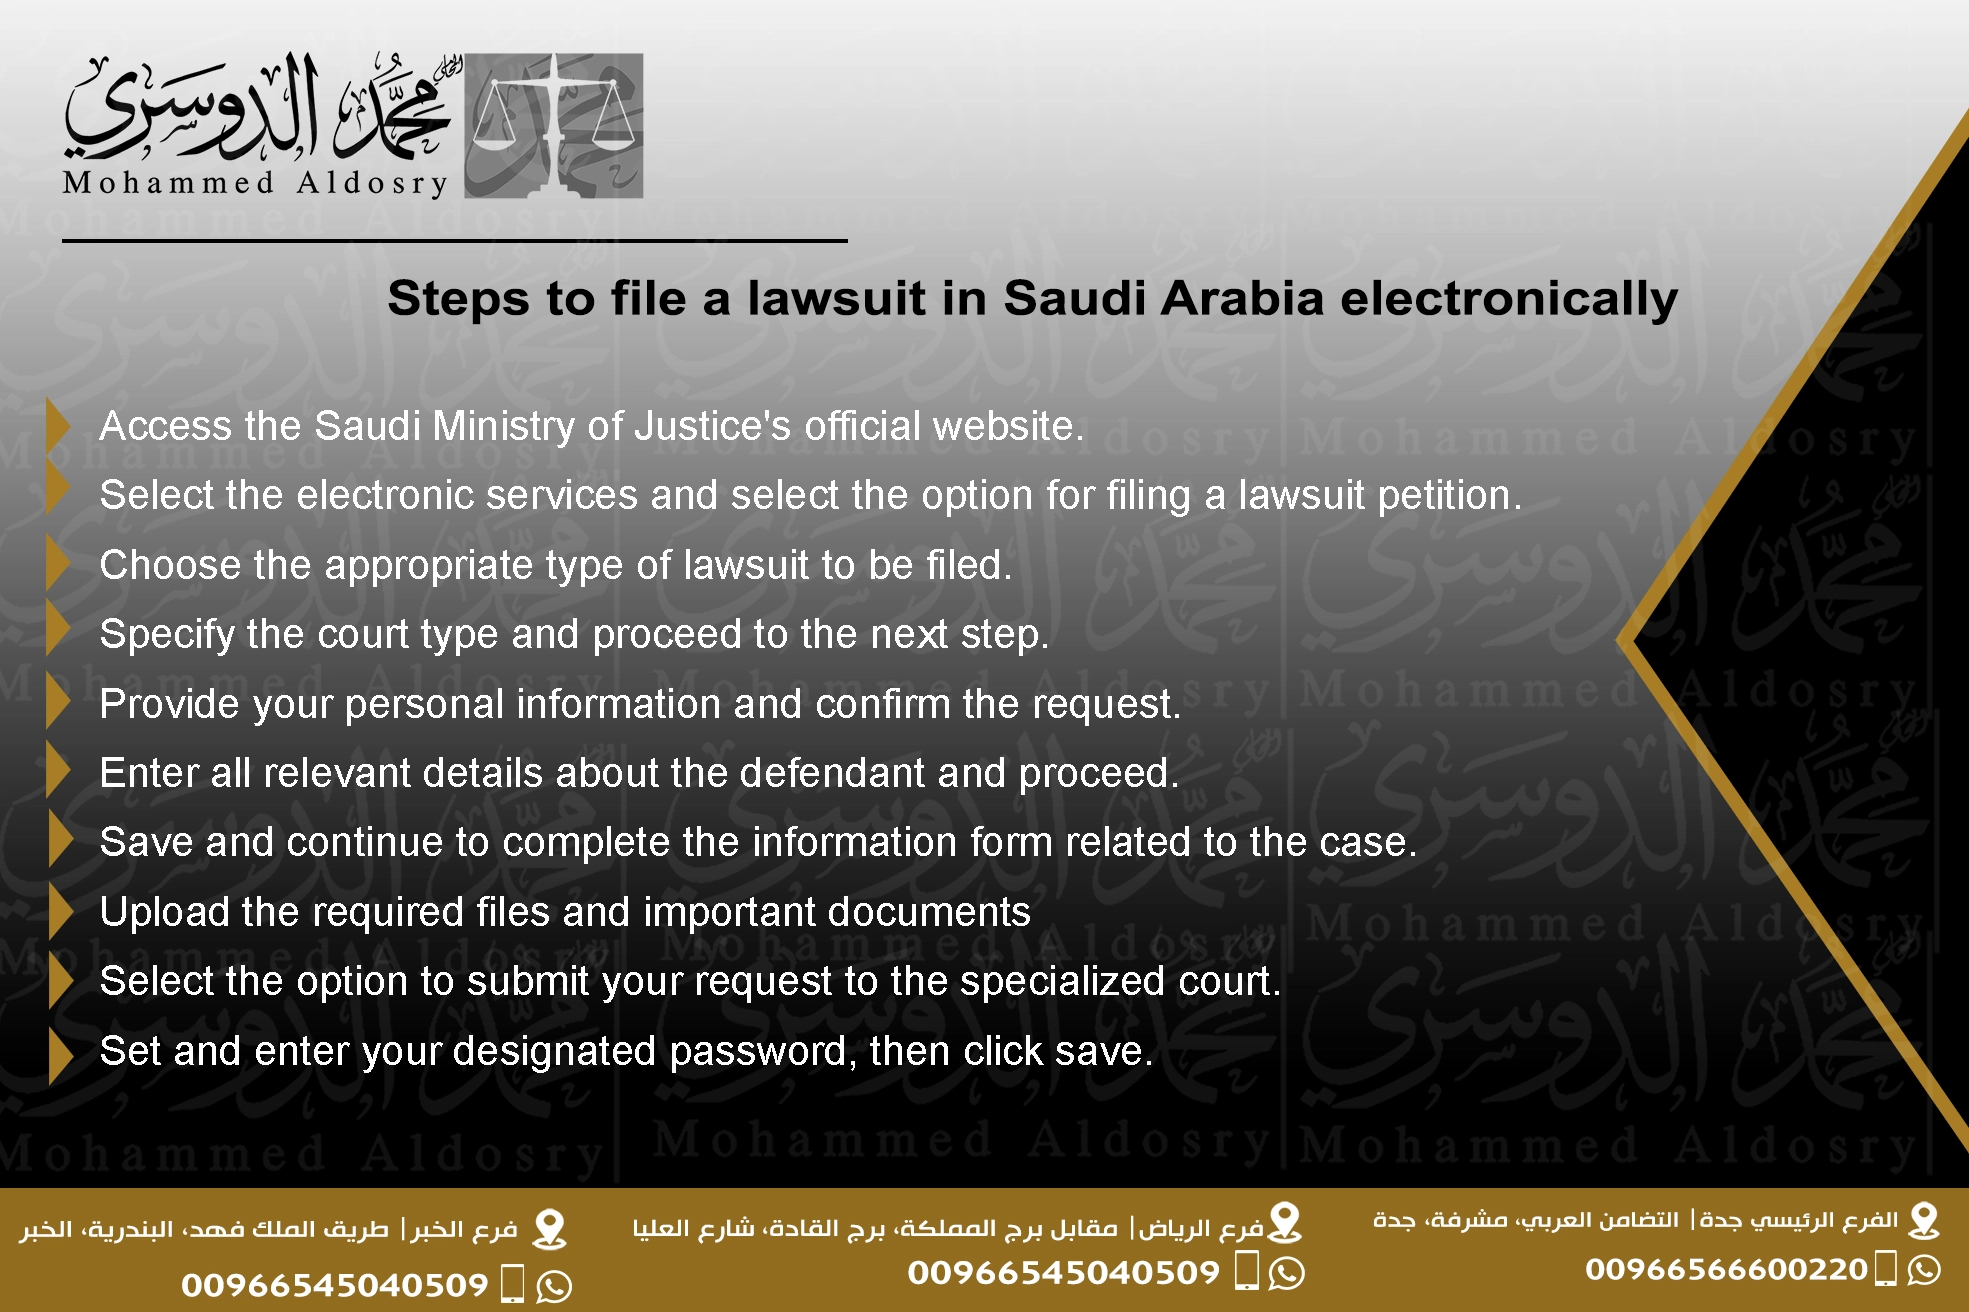 Steps to file a lawsuit in Saudi Arabia electronically